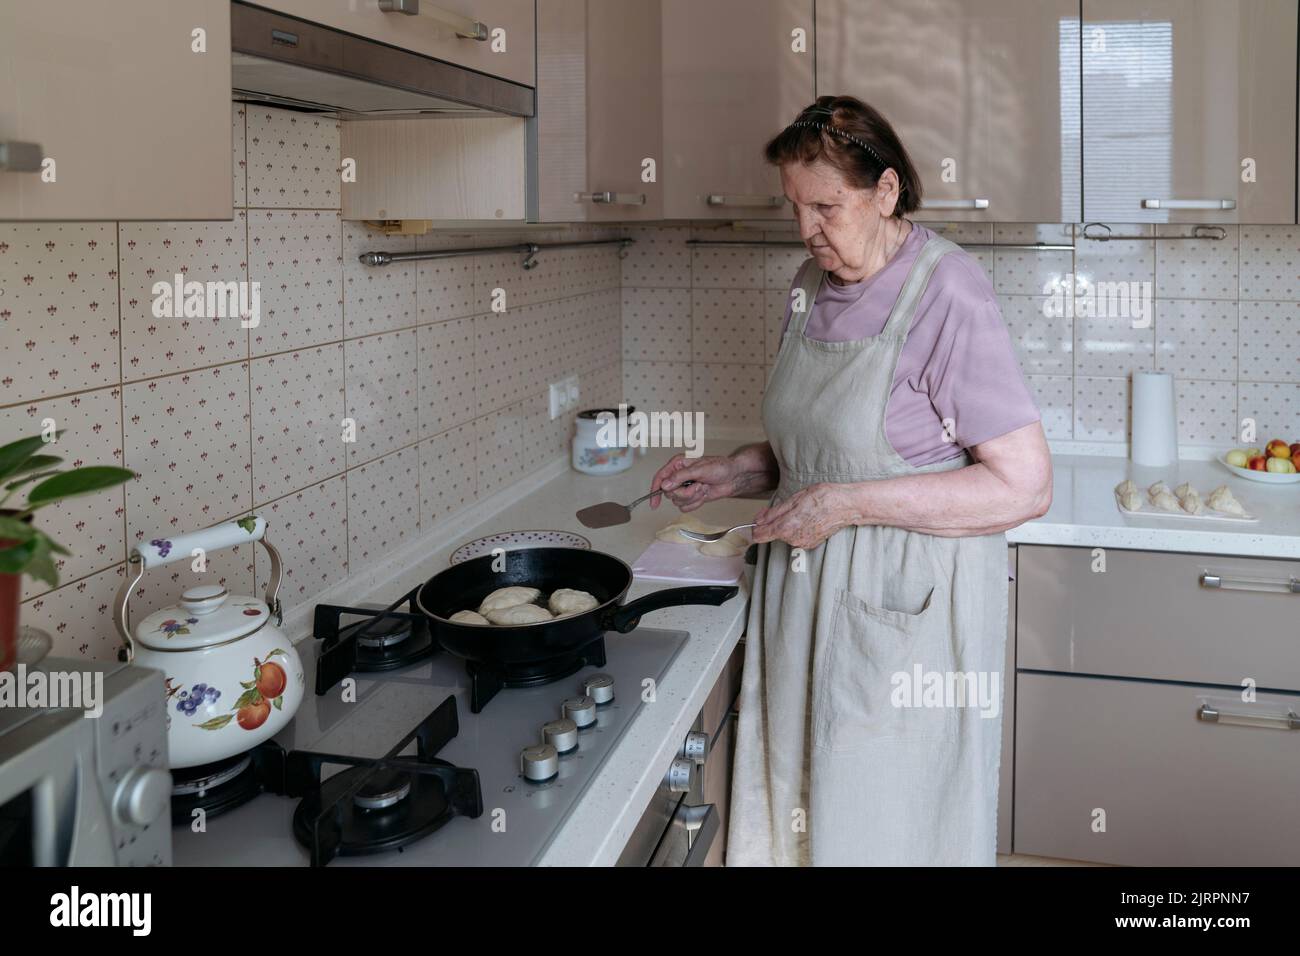 An elderly woman is frying pies in her kitchen. Stock Photo